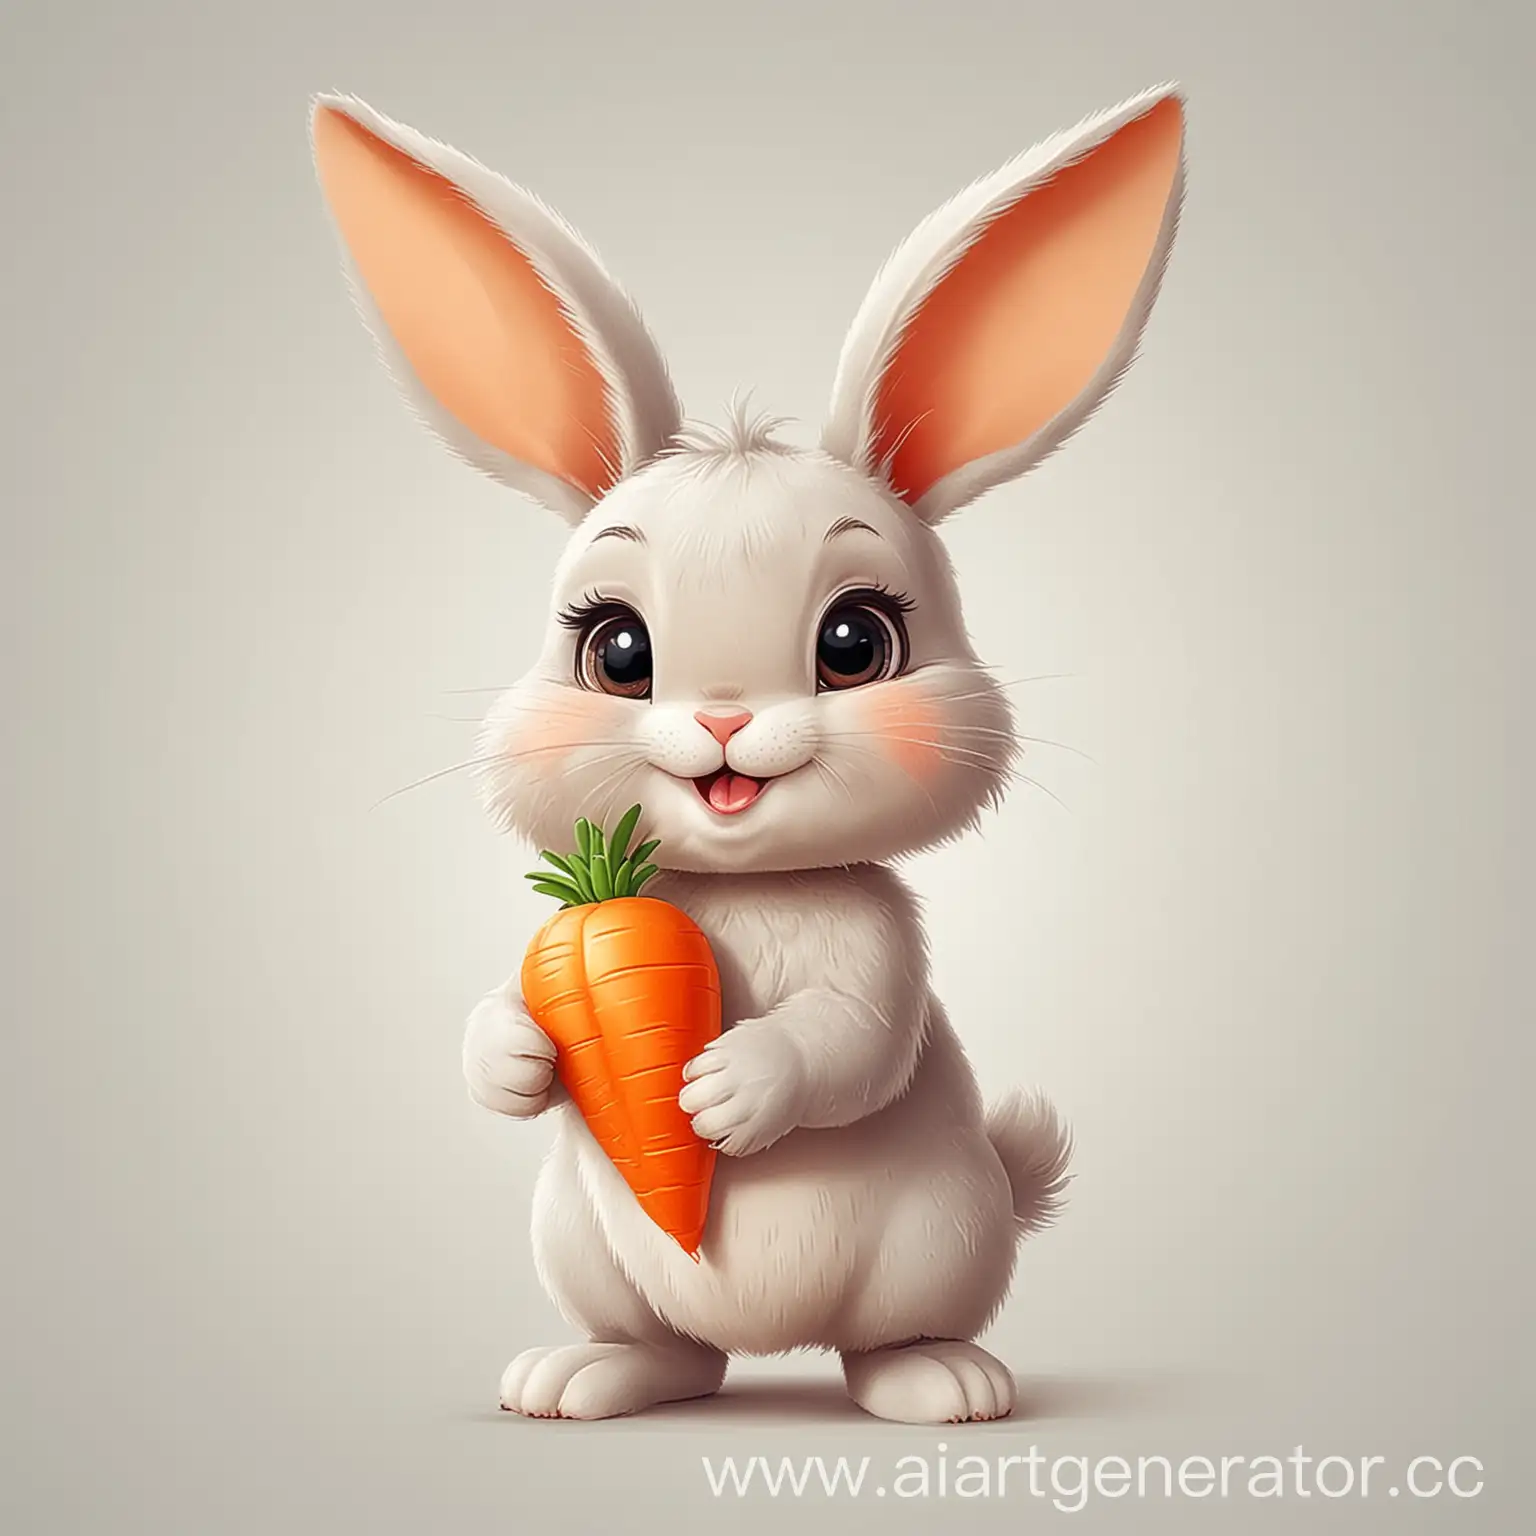 Cartoon-Bunny-Holding-Carrot-on-White-Background